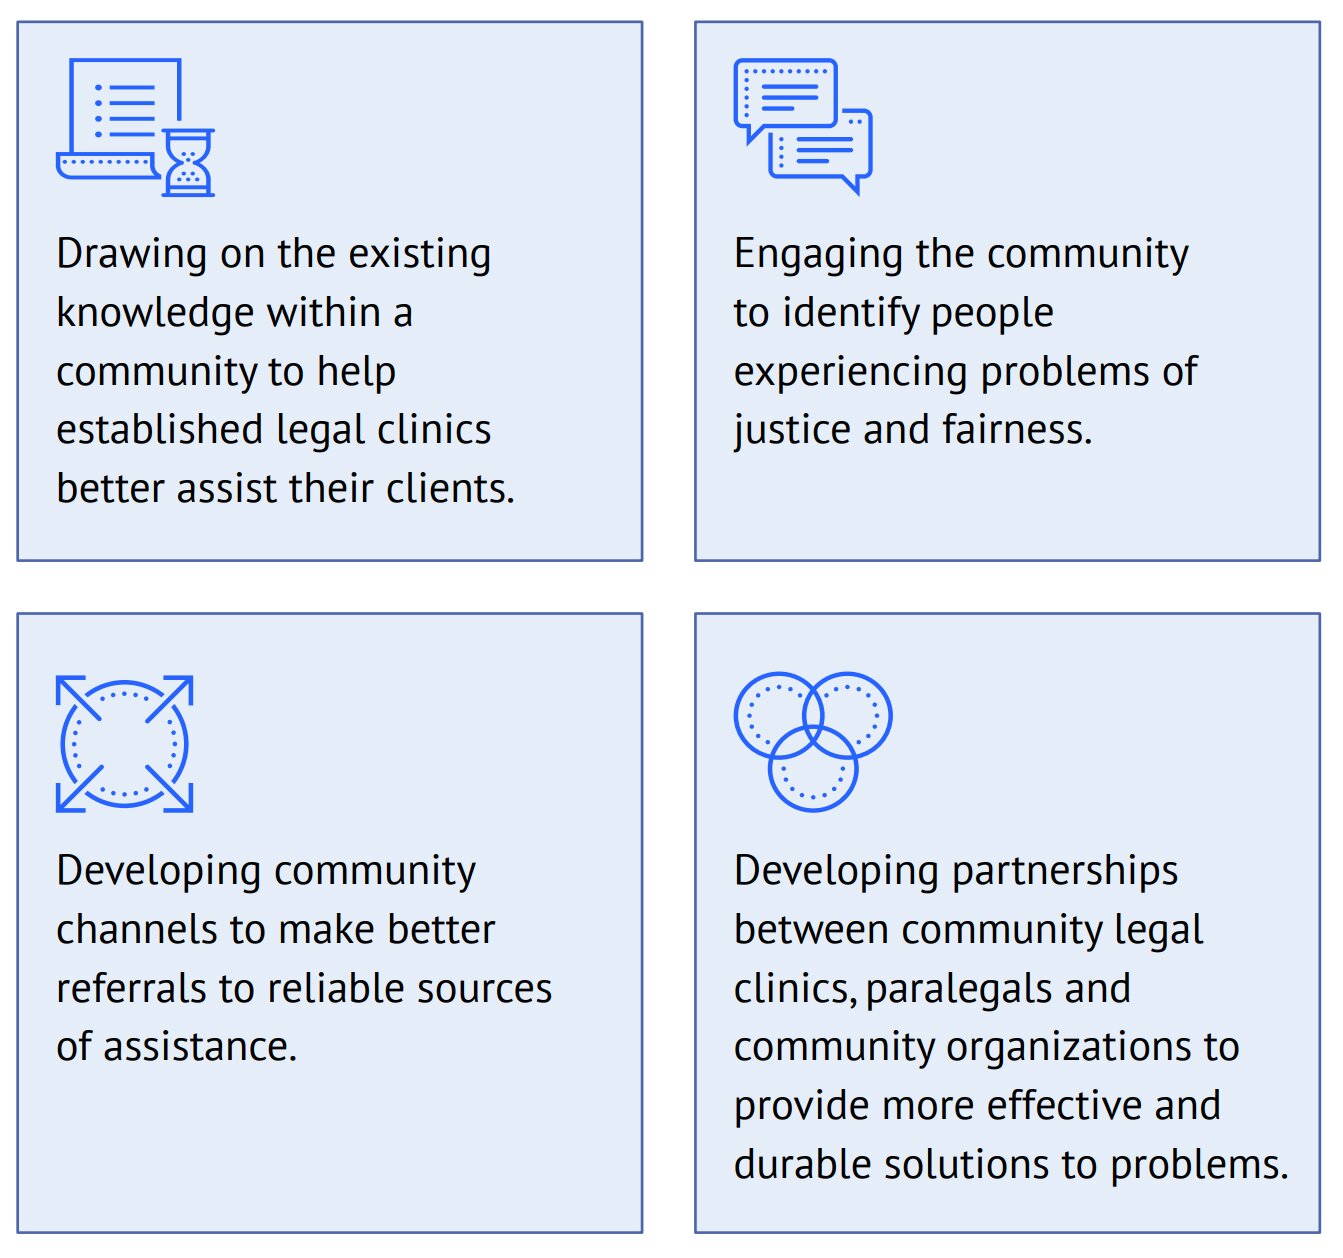 International report explores community legal services for better access to justice